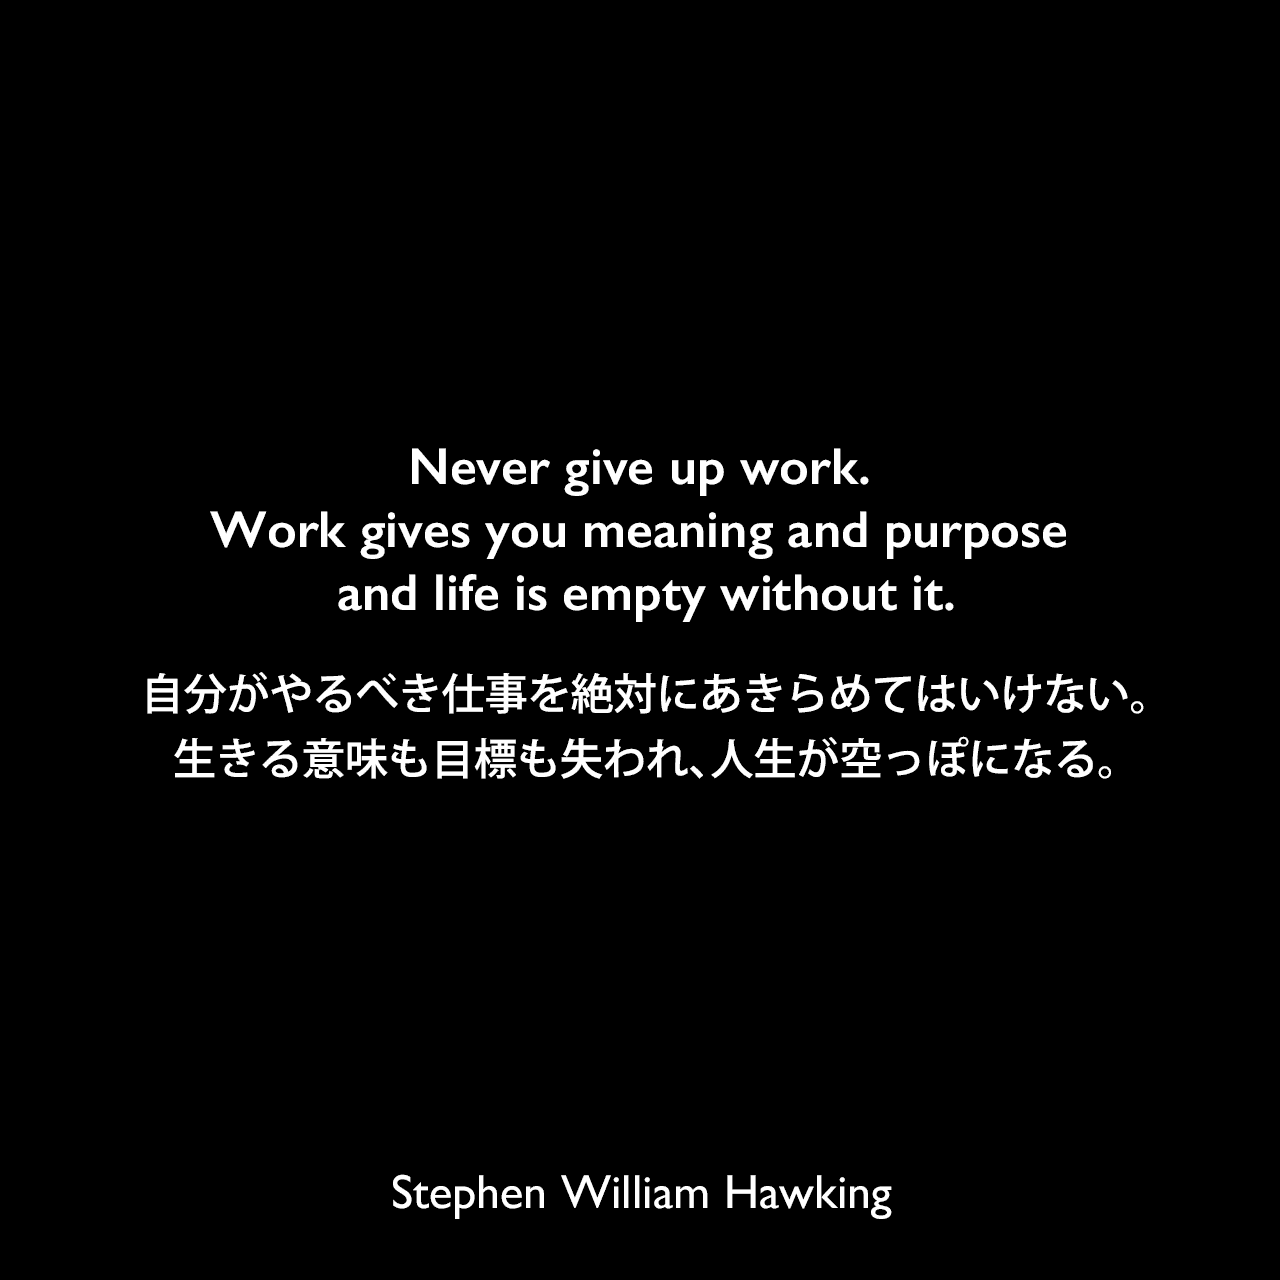 Never give up work. Work gives you meaning and purpose and life is empty without it.自分がやるべき仕事を絶対にあきらめてはいけない。生きる意味も目標も失われ、人生が空っぽになる。Stephen William Hawking